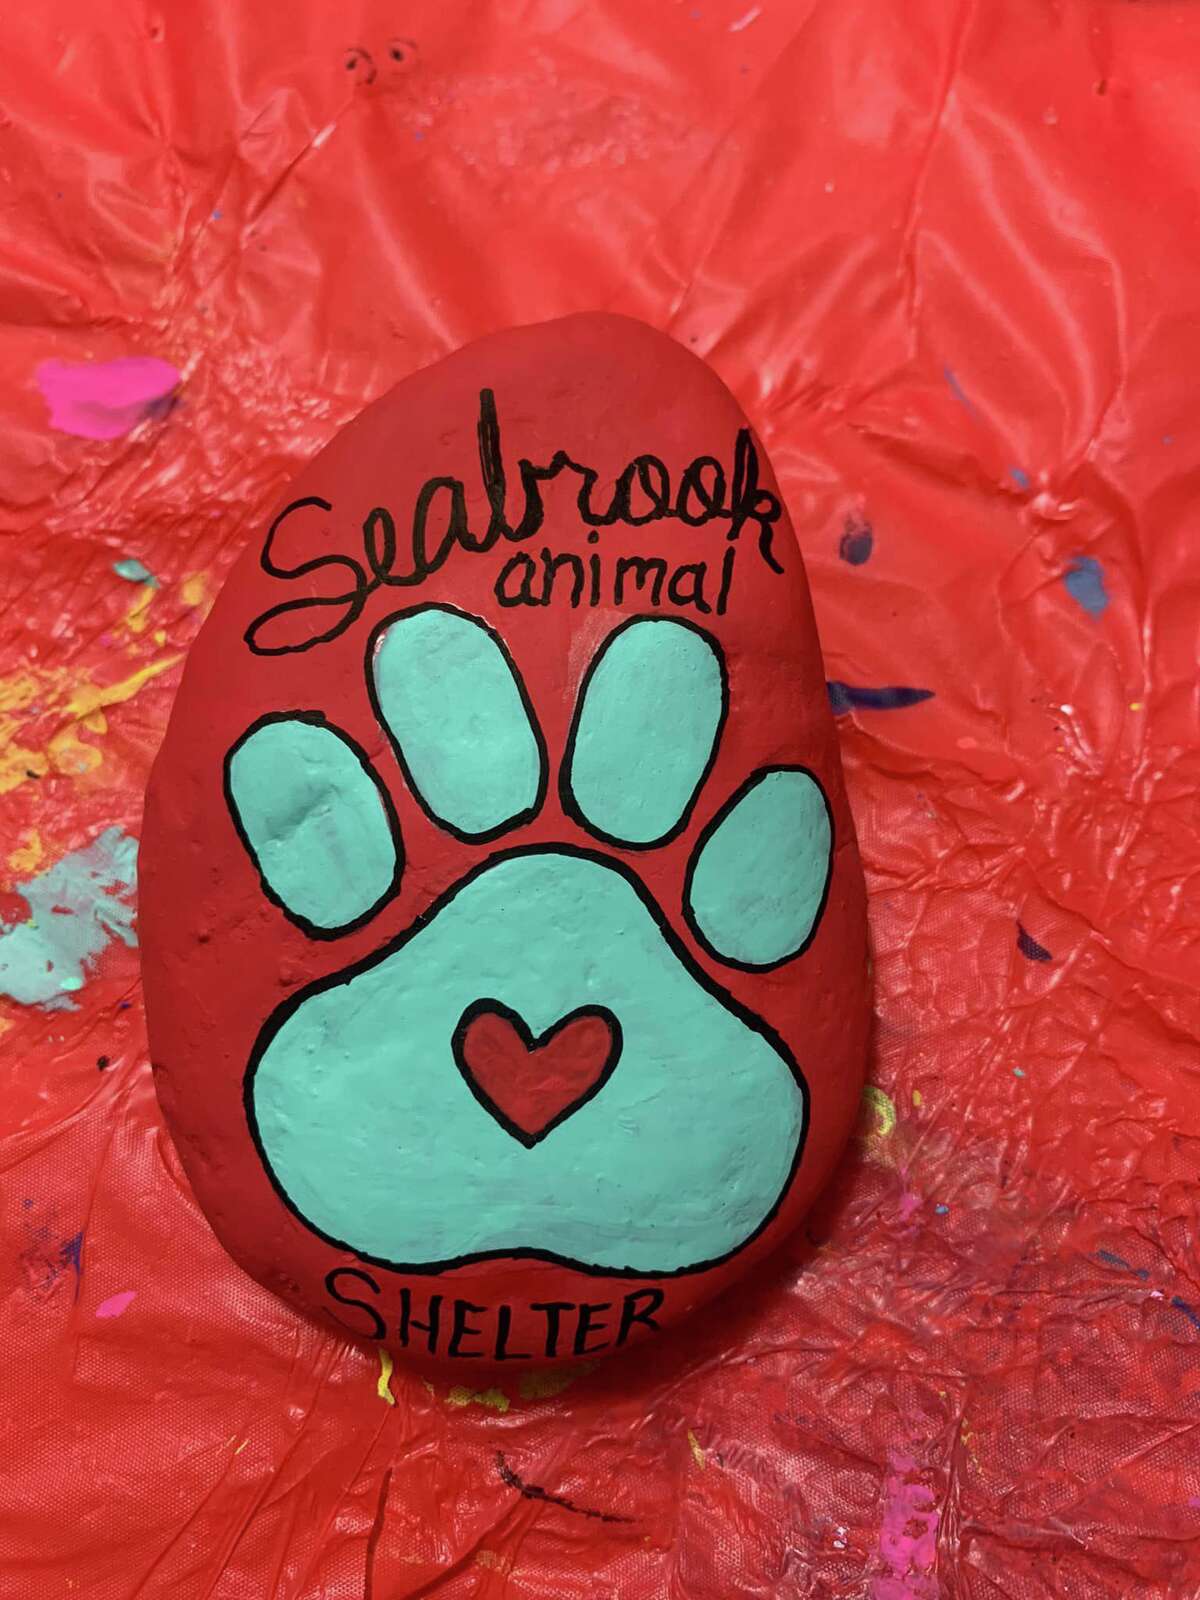 No one knows why a garden of painted stones like this one disappeared overnight at the Seabrook Animal Shelter last week, but on from 9 a.m. to 1 p.m. Saturday, July 9, a group of rock-painting enthusiasts hope the community can help to replace them.